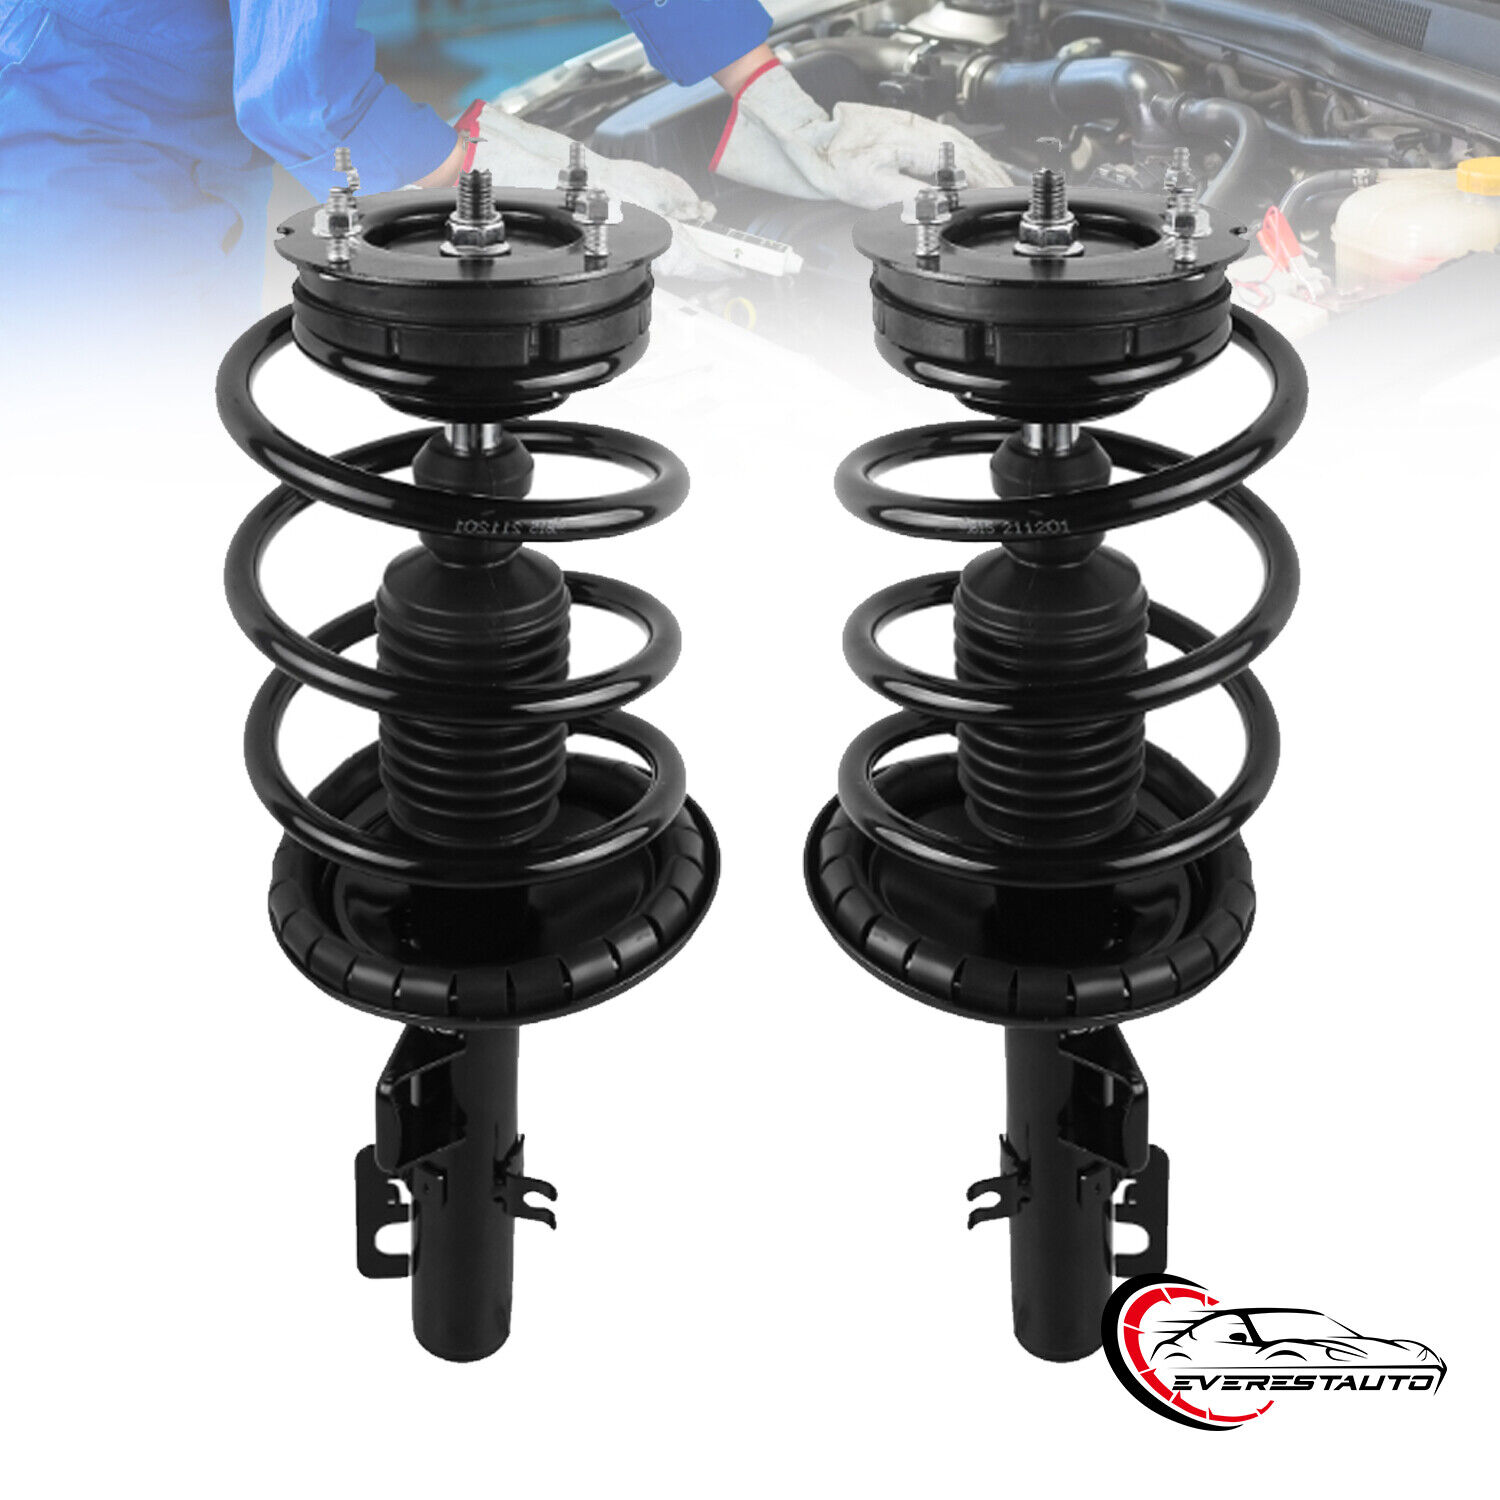 2X Front Struts Assembly For Mercury Montego Ford Five Hundred 2005 2006 2007